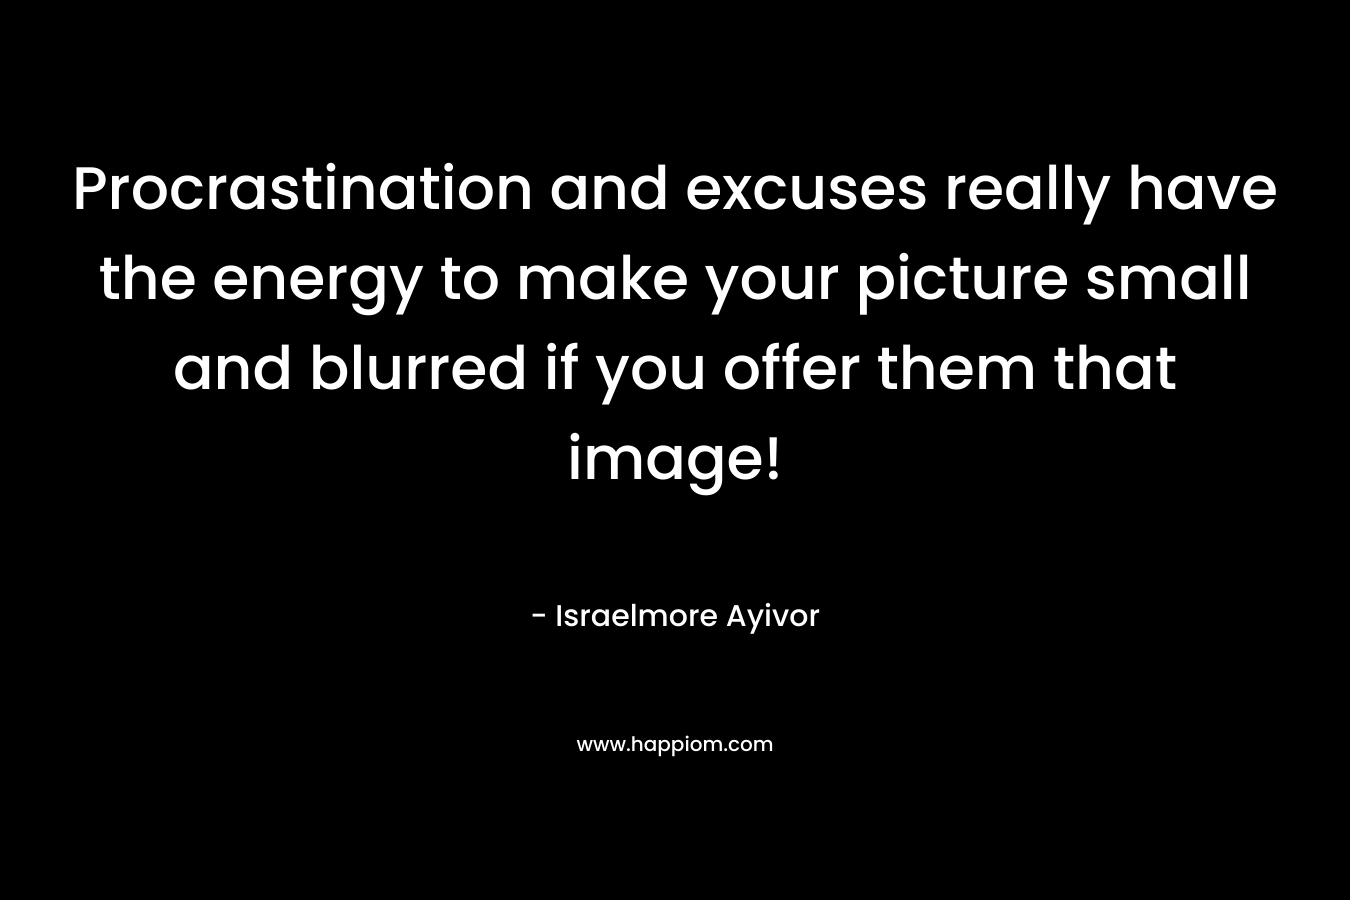 Procrastination and excuses really have the energy to make your picture small and blurred if you offer them that image! – Israelmore Ayivor